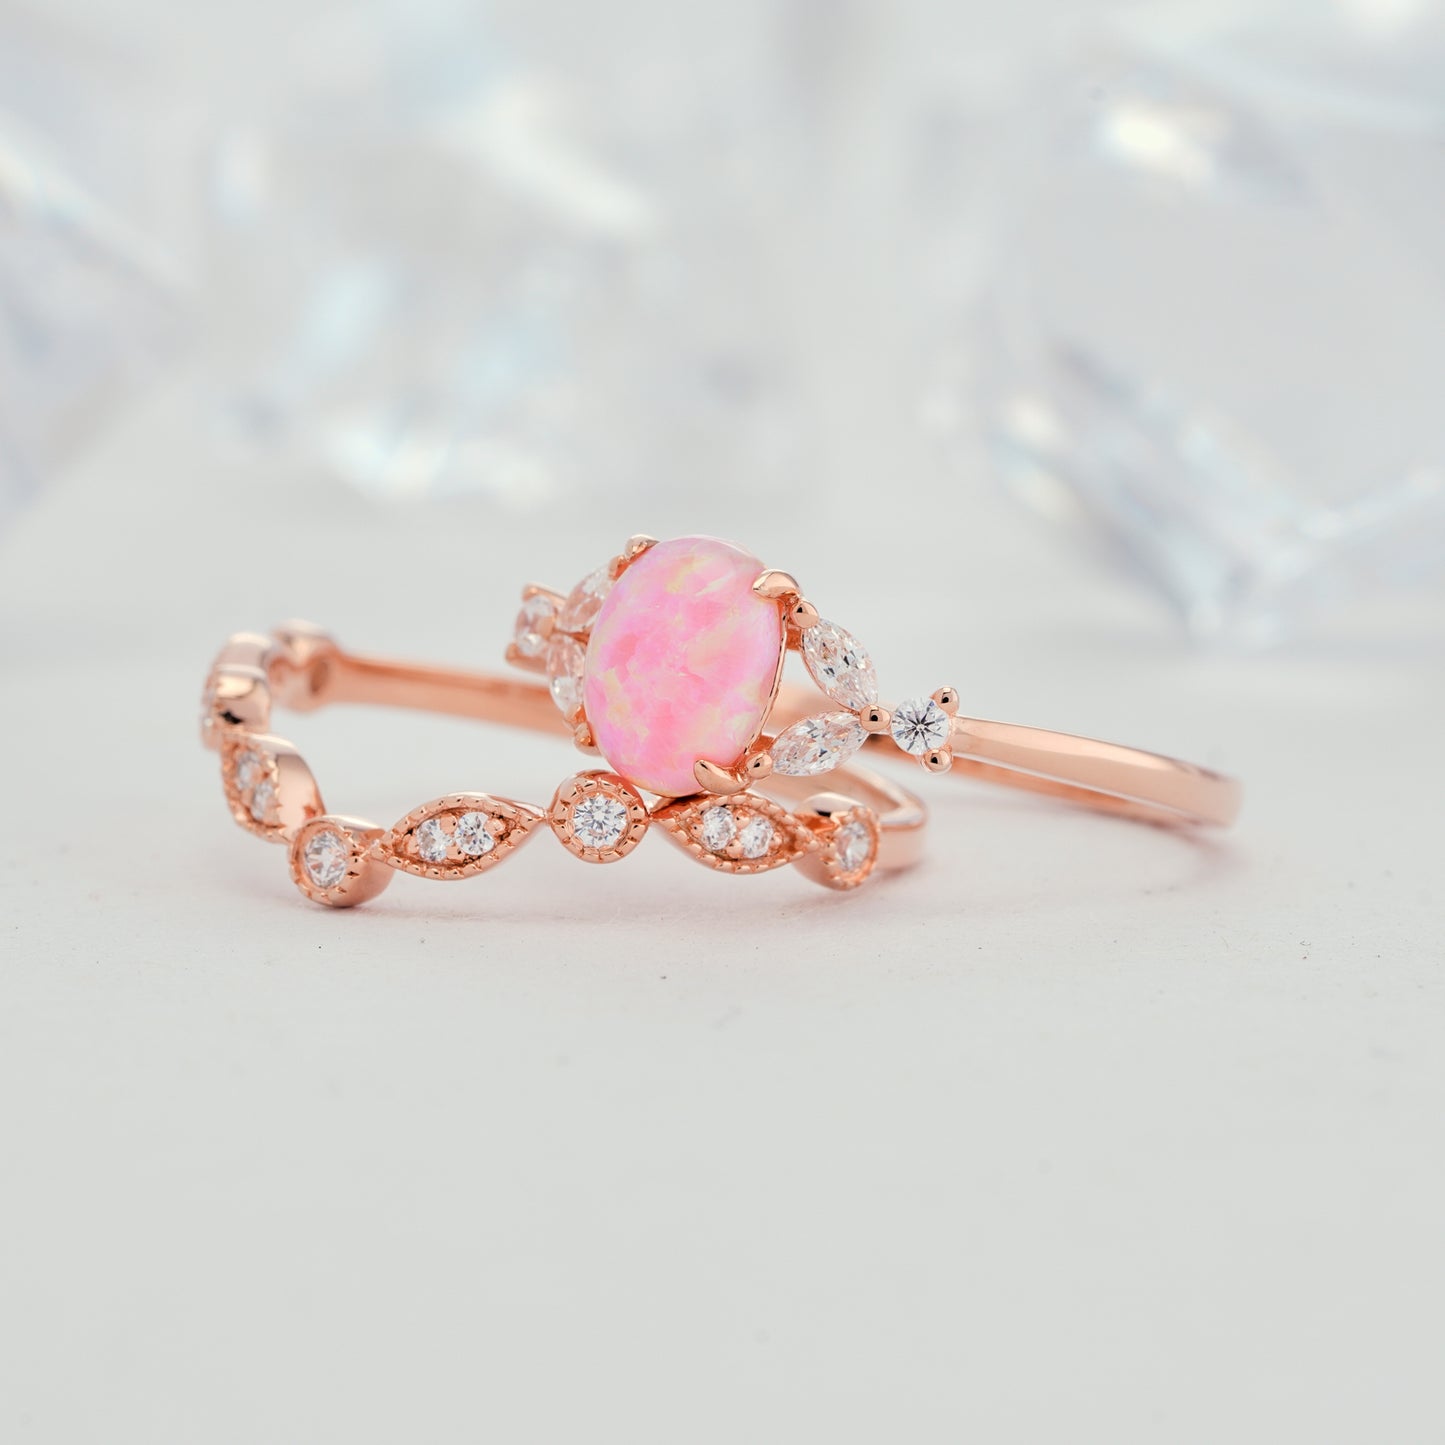 Oval Pink Opal Engagement Natural Diamond Ring Set in 14K/18K Gold - ShainJewelry